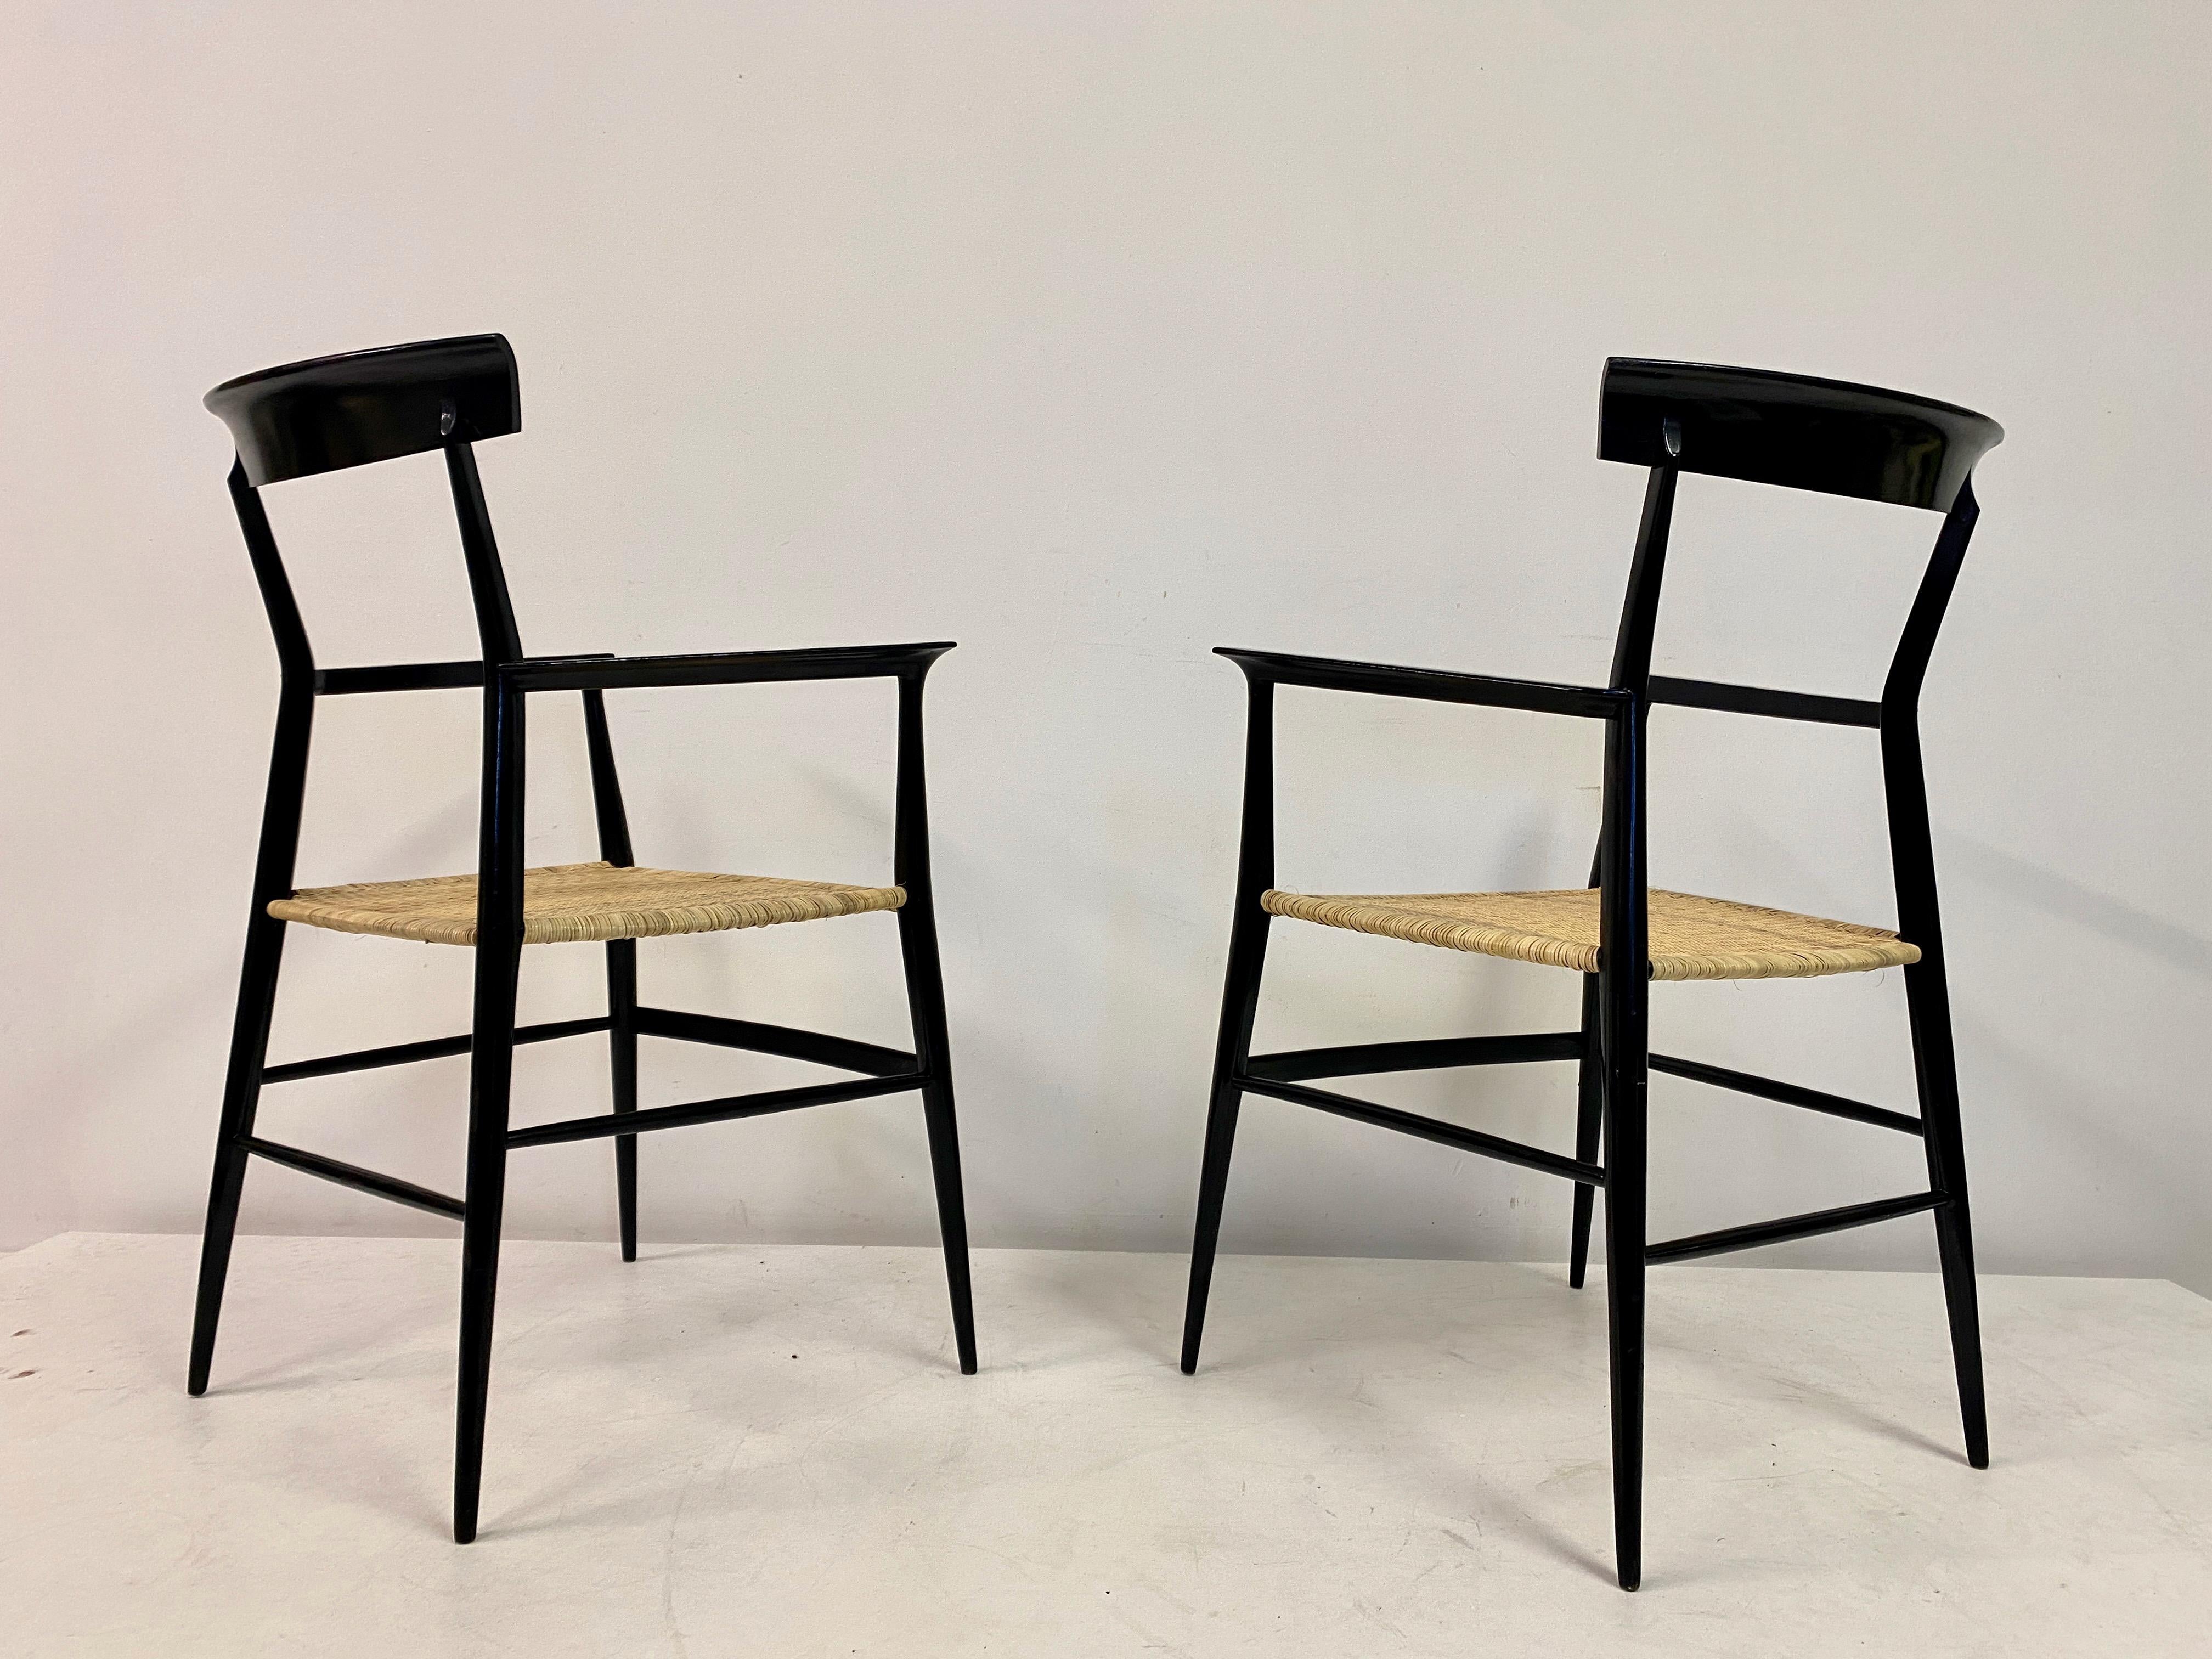 Pair of 1950s Tigullina Chairs by Colombo Sanguineti For Sale 5